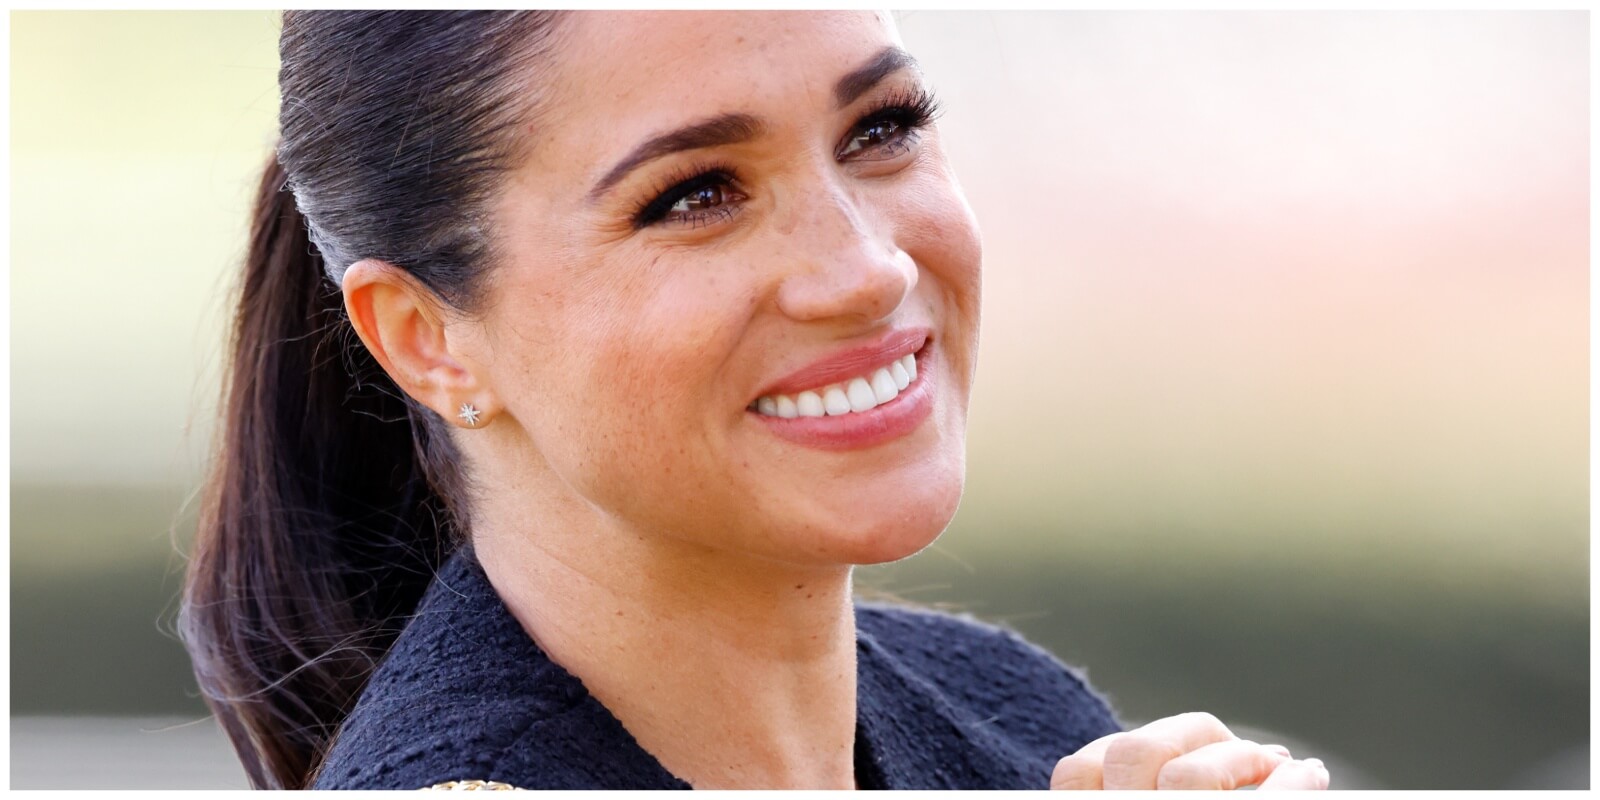 Meghan Markle attends the Land Rover Driving Challenge, on day 1 of the Invictus Games 2020 at Zuiderpark on April 16, 2022 in The Hague, Netherlands.